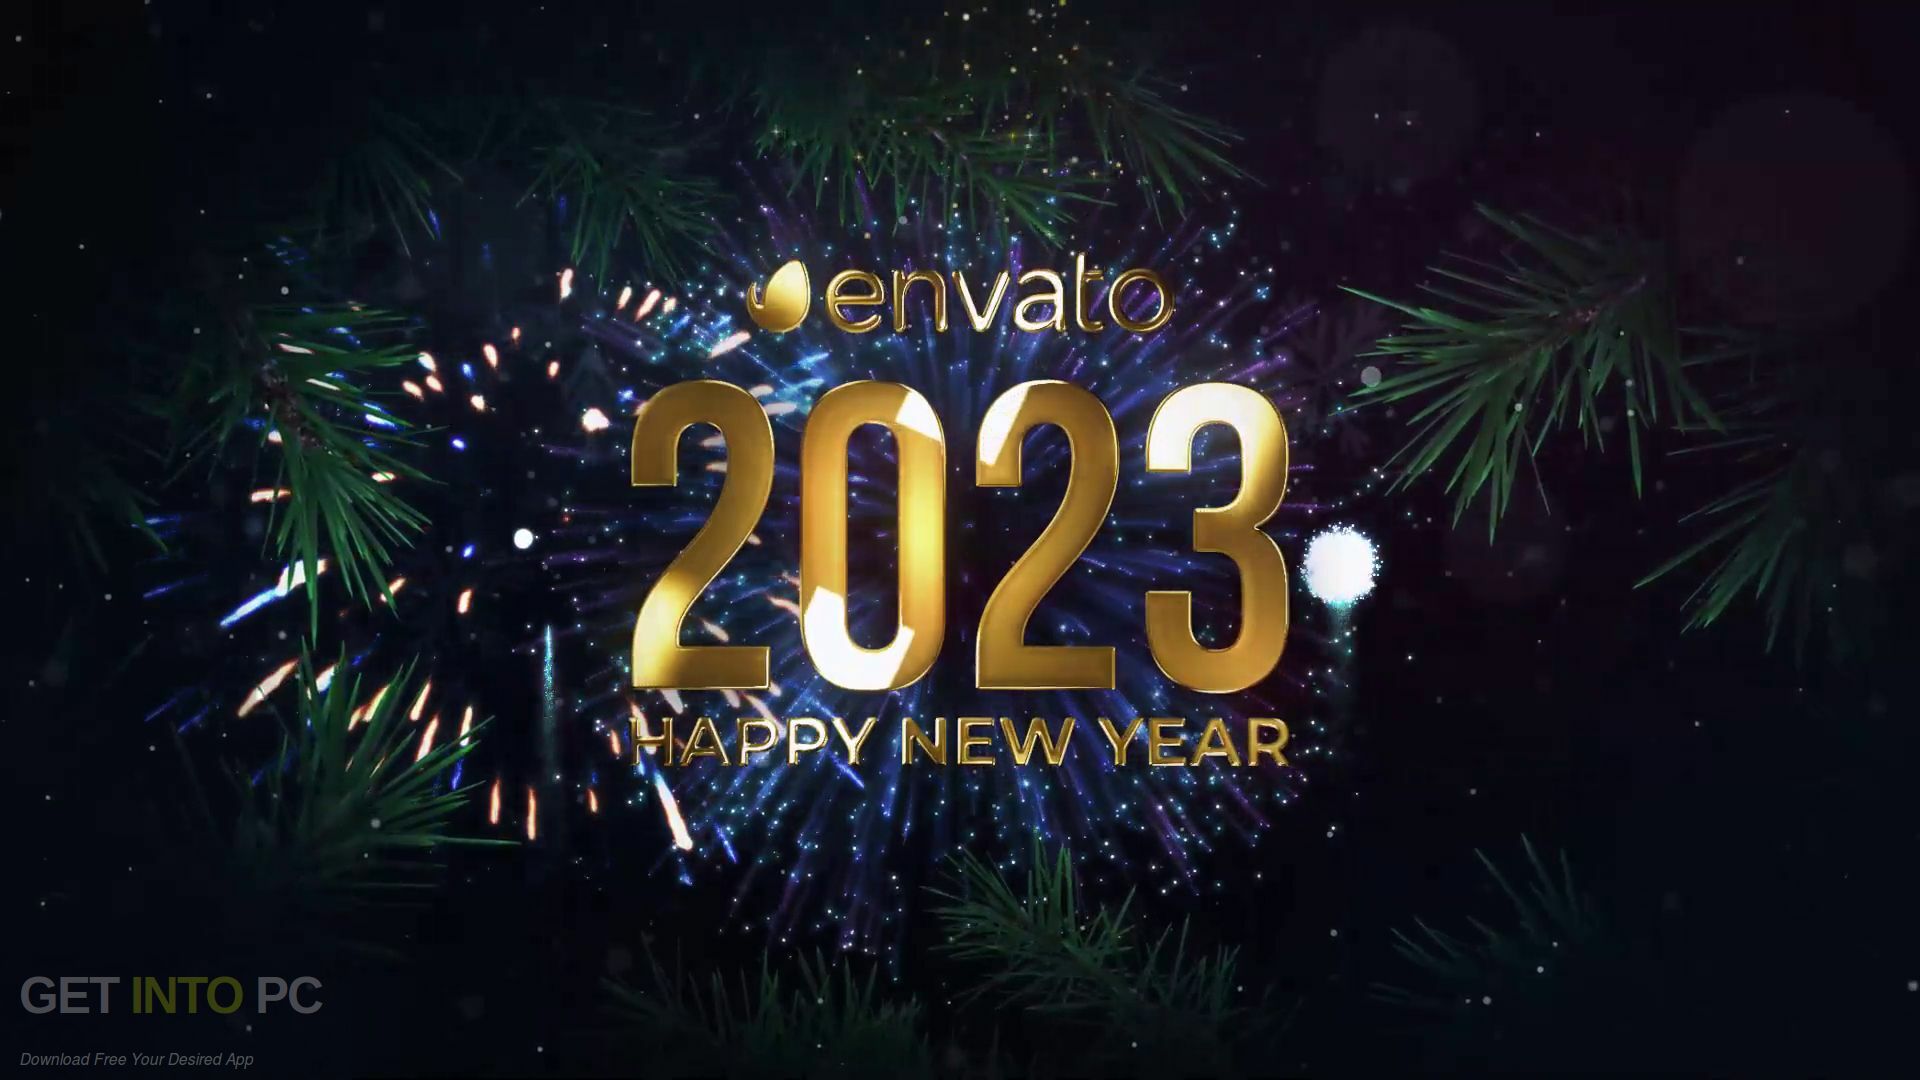 VideoHive - New Year Countdown [AEP] Free Download